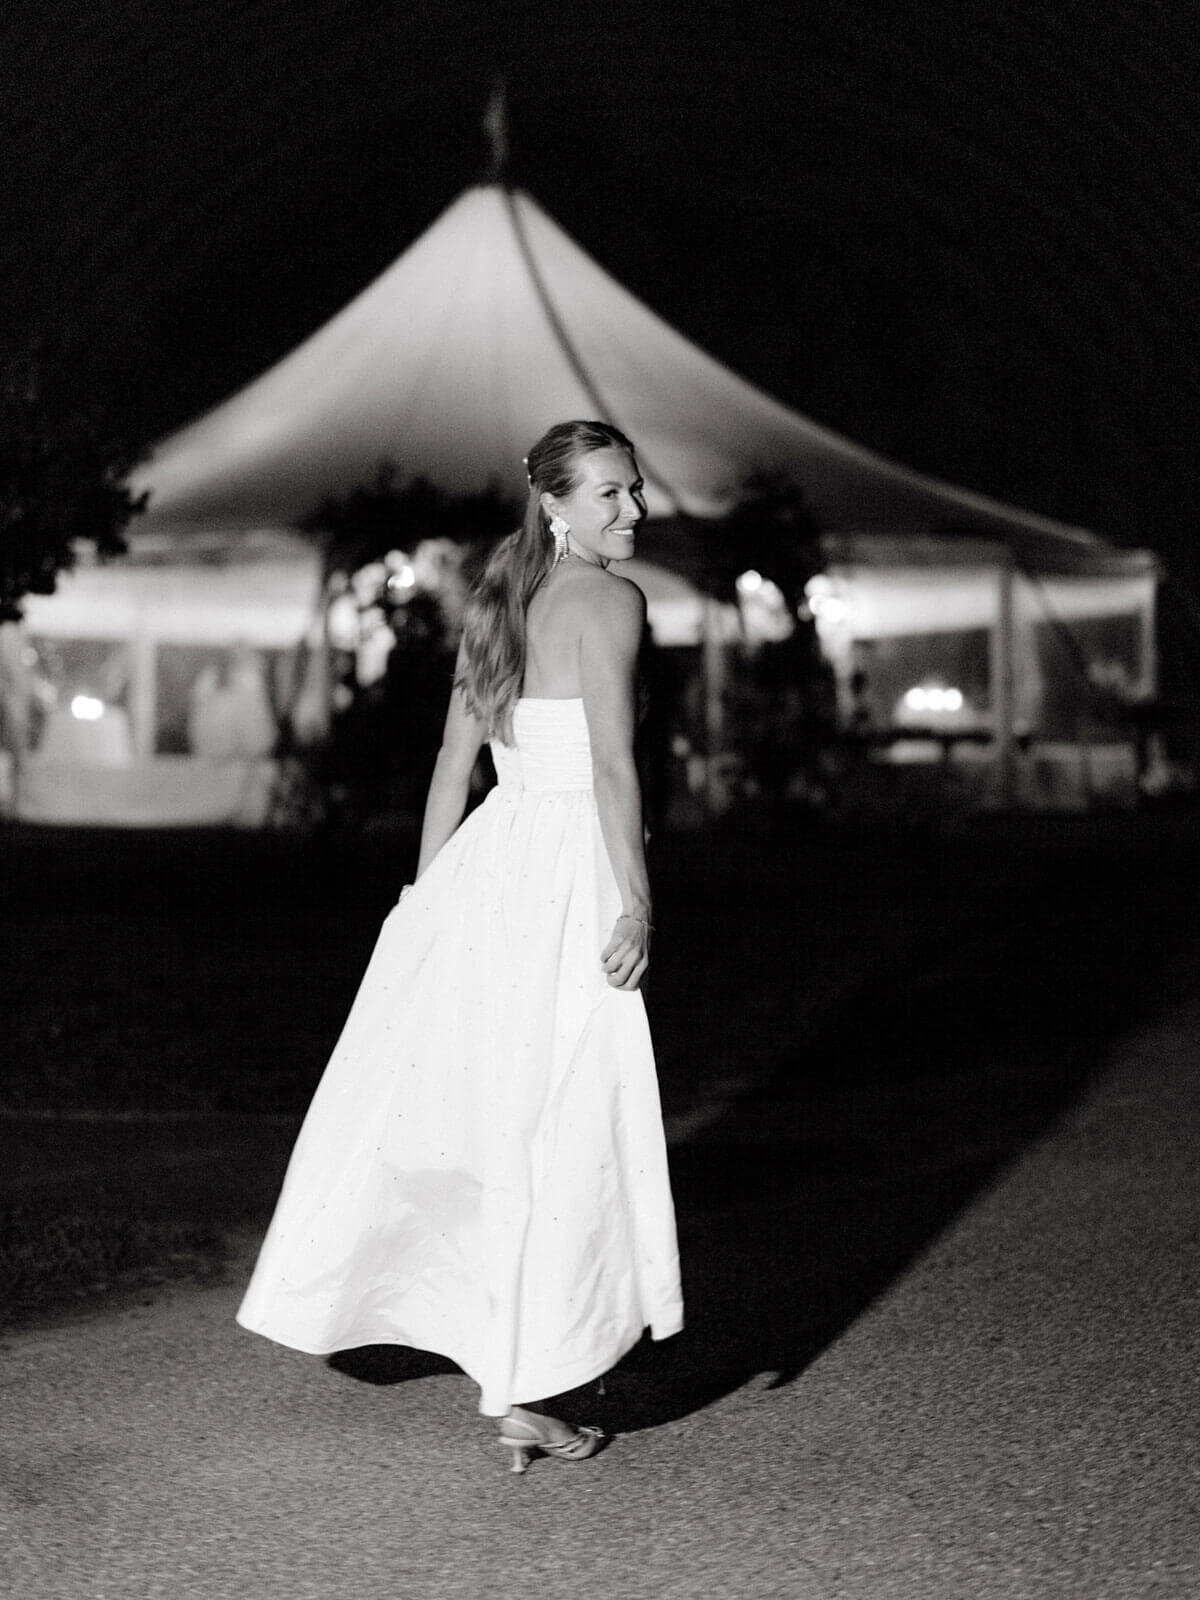 The bride is excitedly walking towards the wedding reception tent at The Ausable Club, NY. Image by Jenny Fu Studio